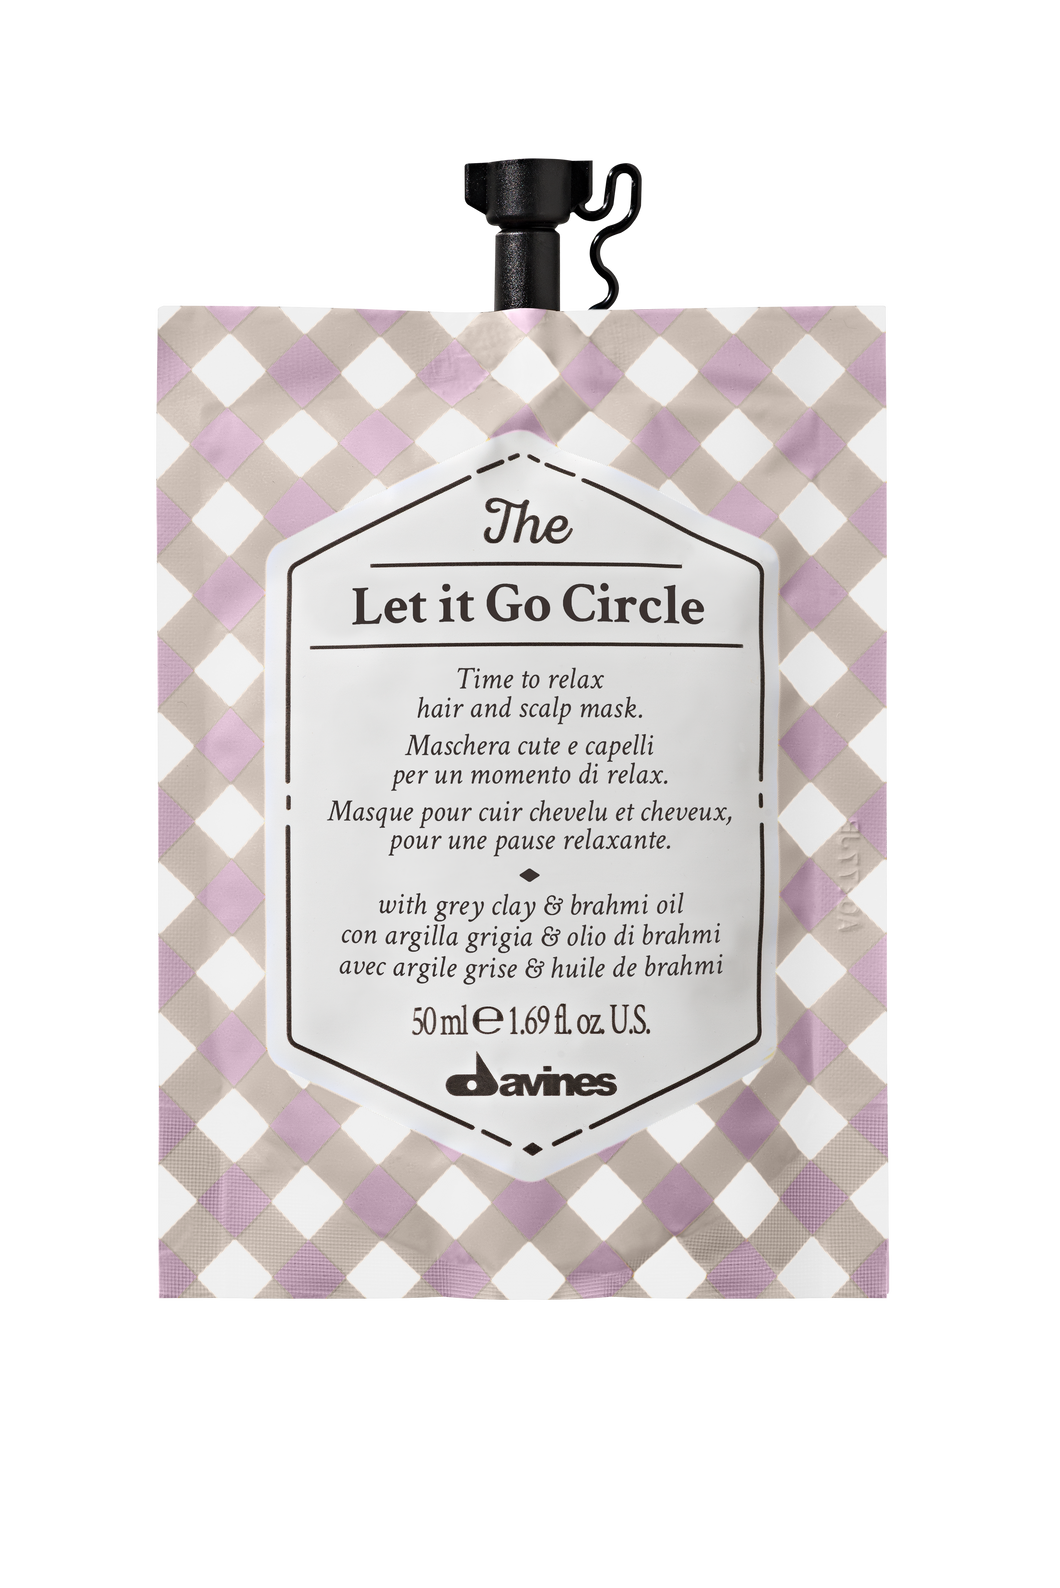 The Let it Go Circle